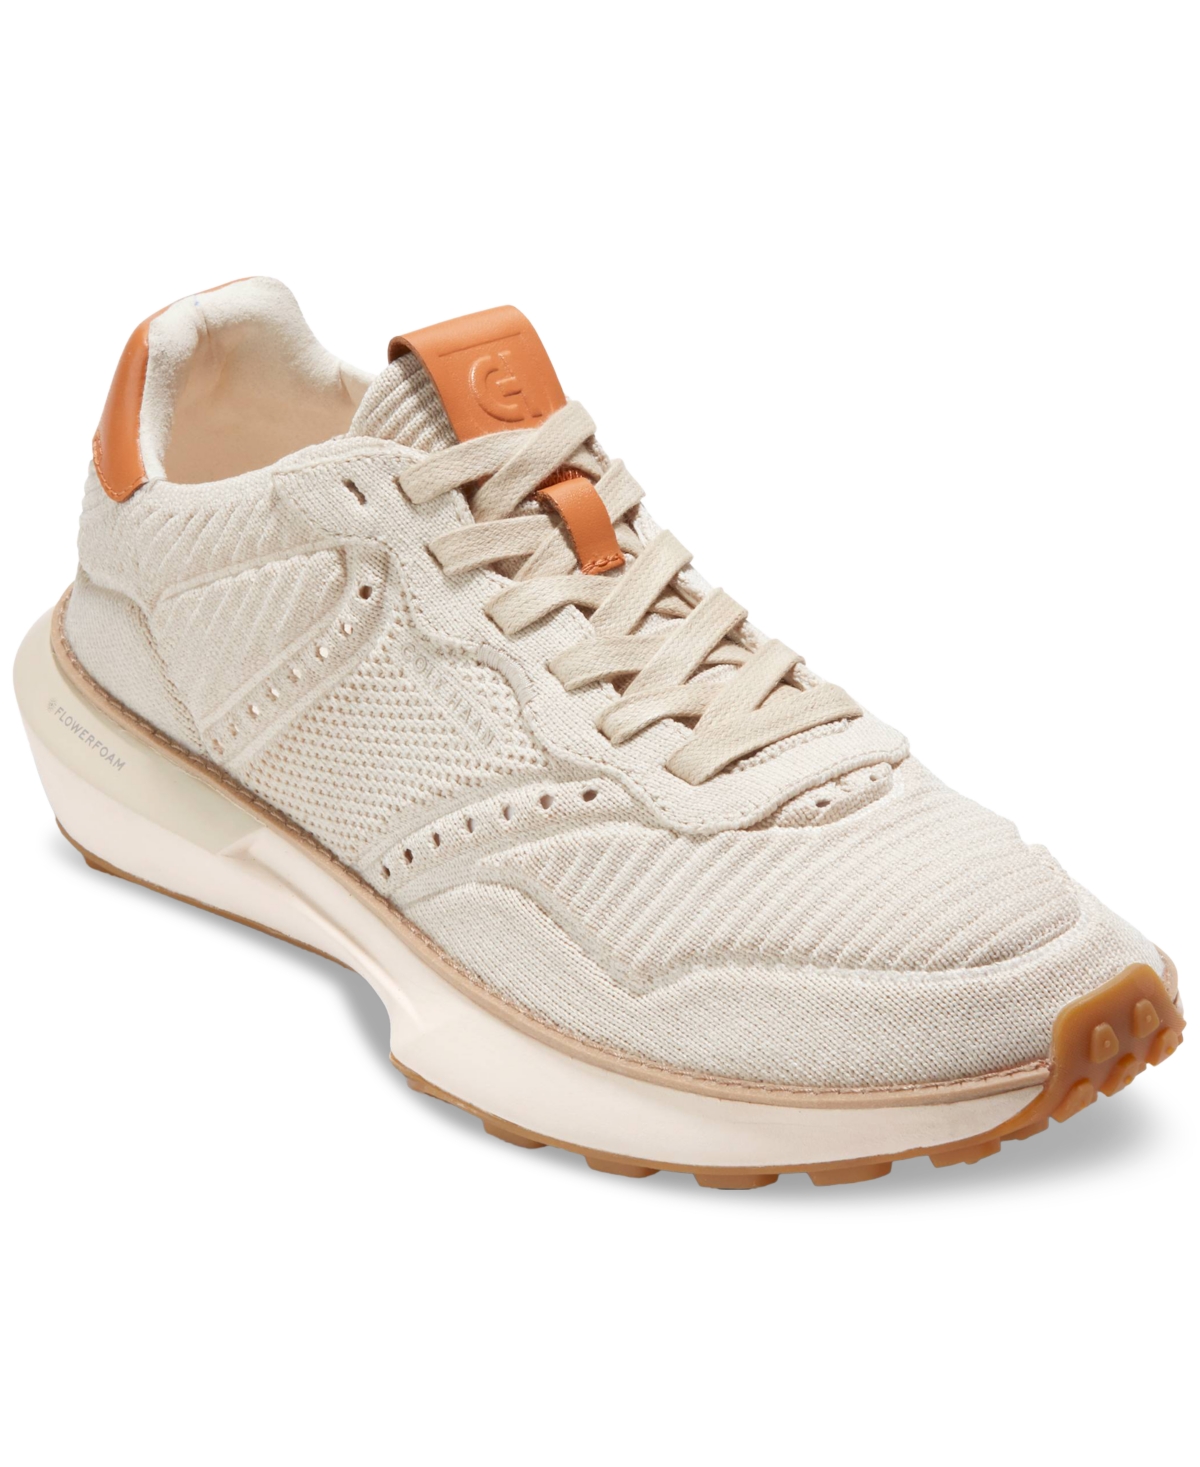 Men's GrandPrø Ashland Stitchlite Lace-Up Sneakers - Silver Lining/natural Tan/ivory